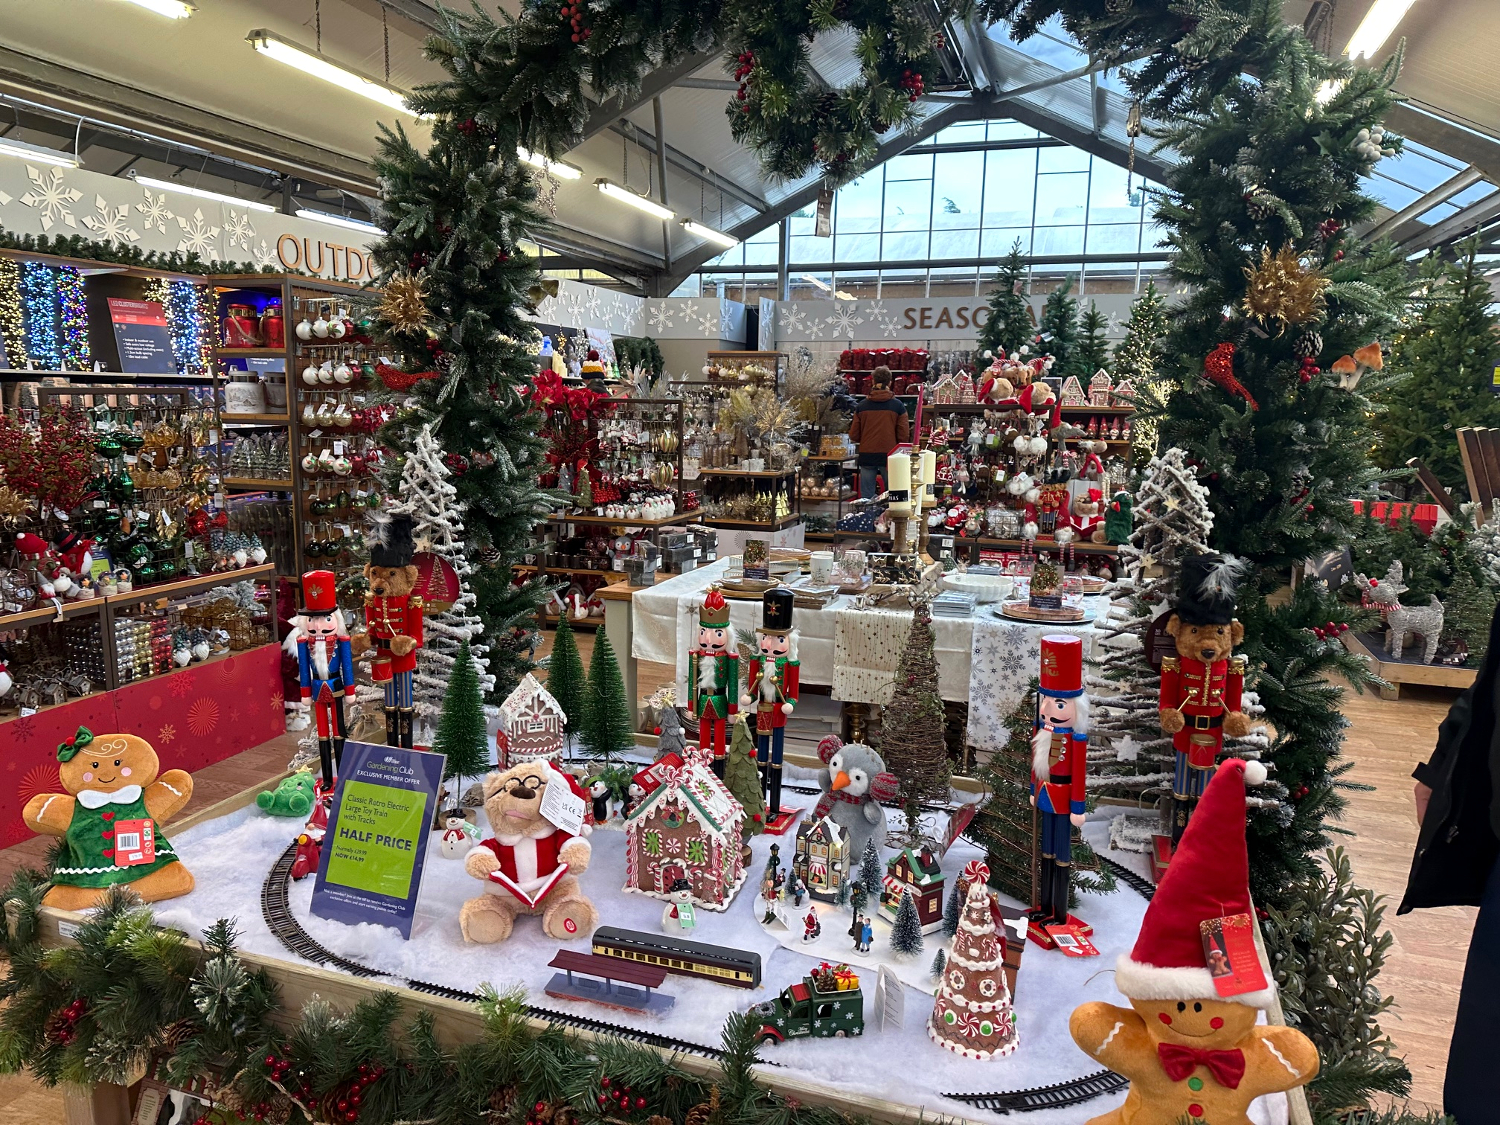 Hillier Garden Centre Christmas display, West Sussex. Photo by A.Howse